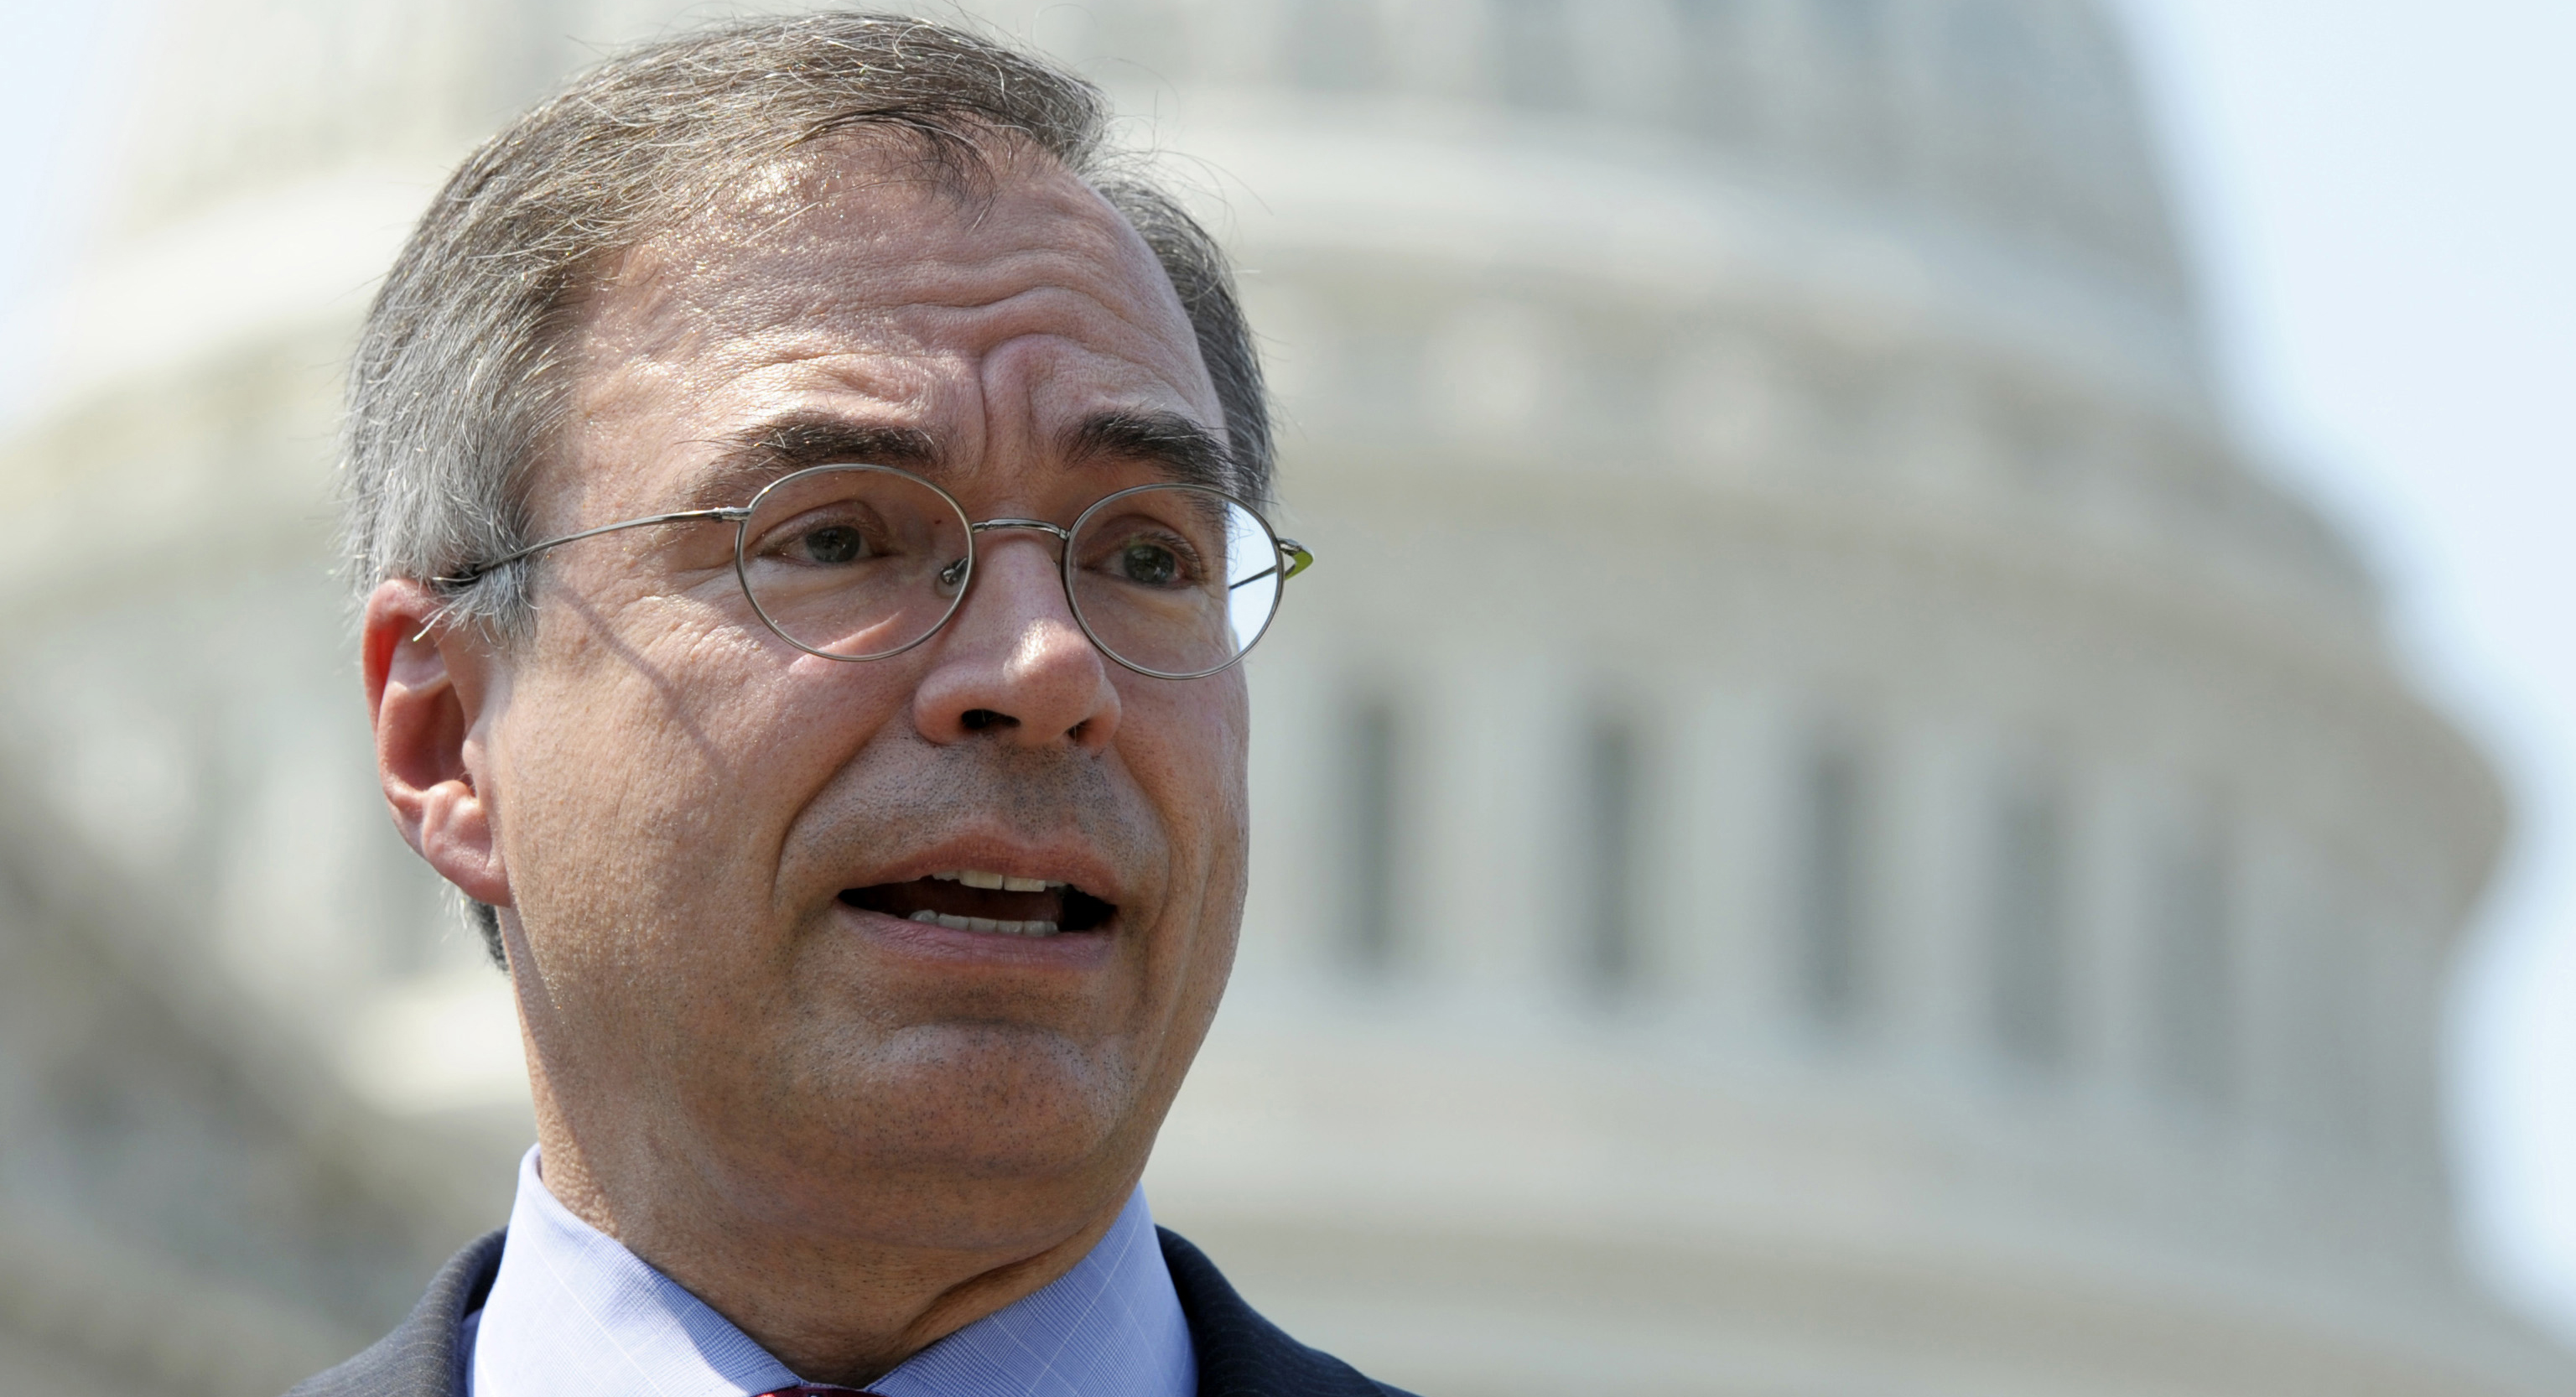 Rep. Andy Harris, R-Md., speaks at a news conference outside the U.S. Capitol in Washington. 